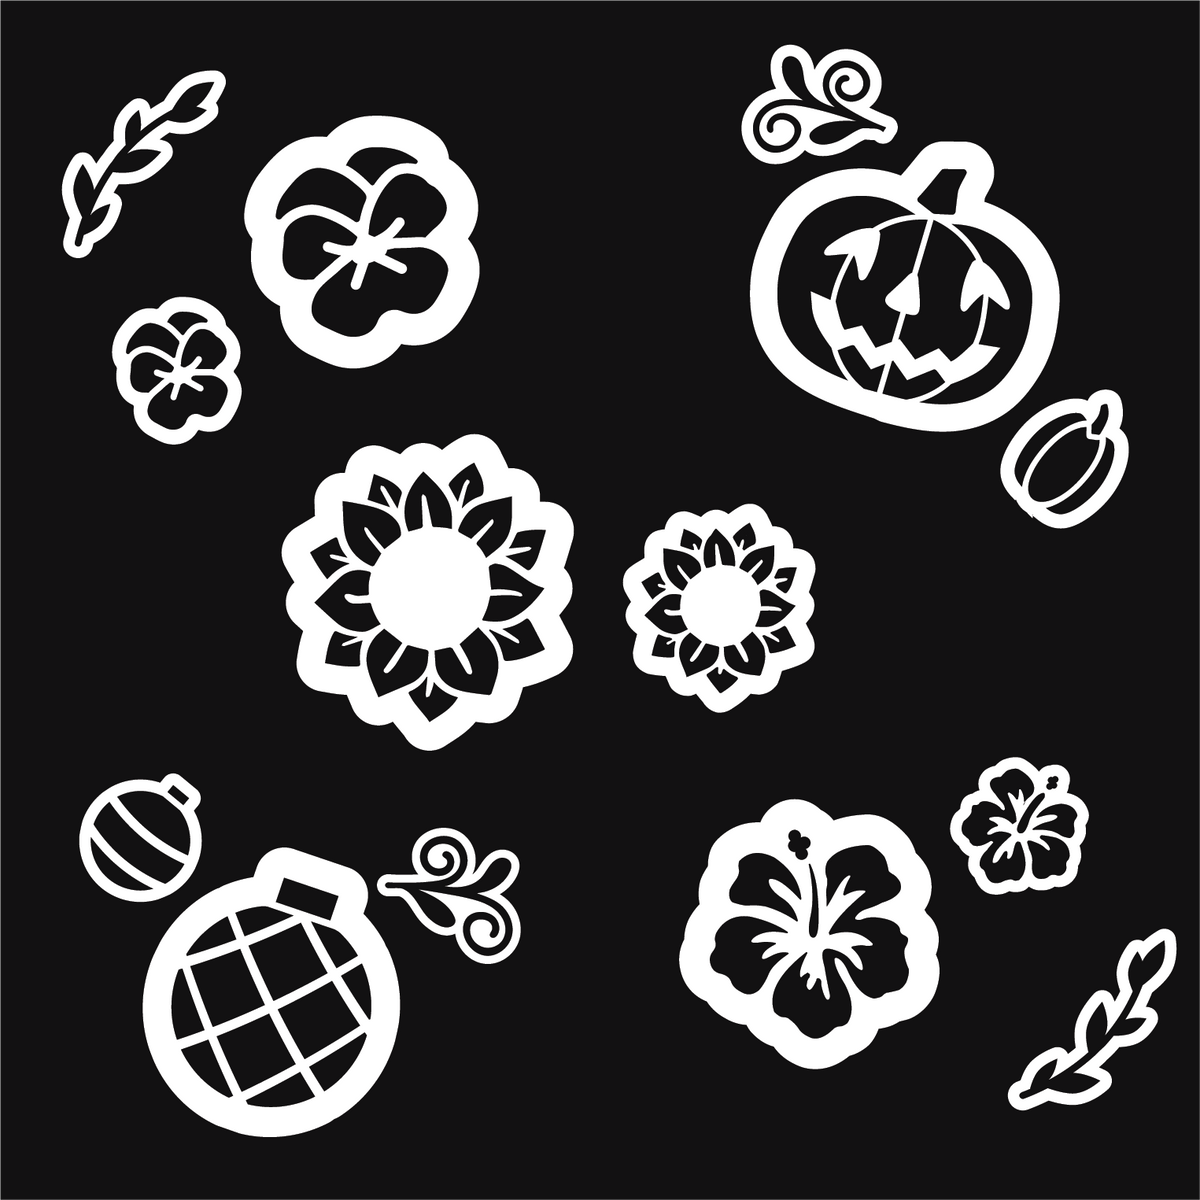 Plata Chalkboards Magnetic Seasonal Stencil Set: small and large Pansy spring stencils, large and small sunflower summer stencils, Jack o&#39; lantern and pumpkin fall stencils, large and small ornament stencils for chalkboards and whiteboards